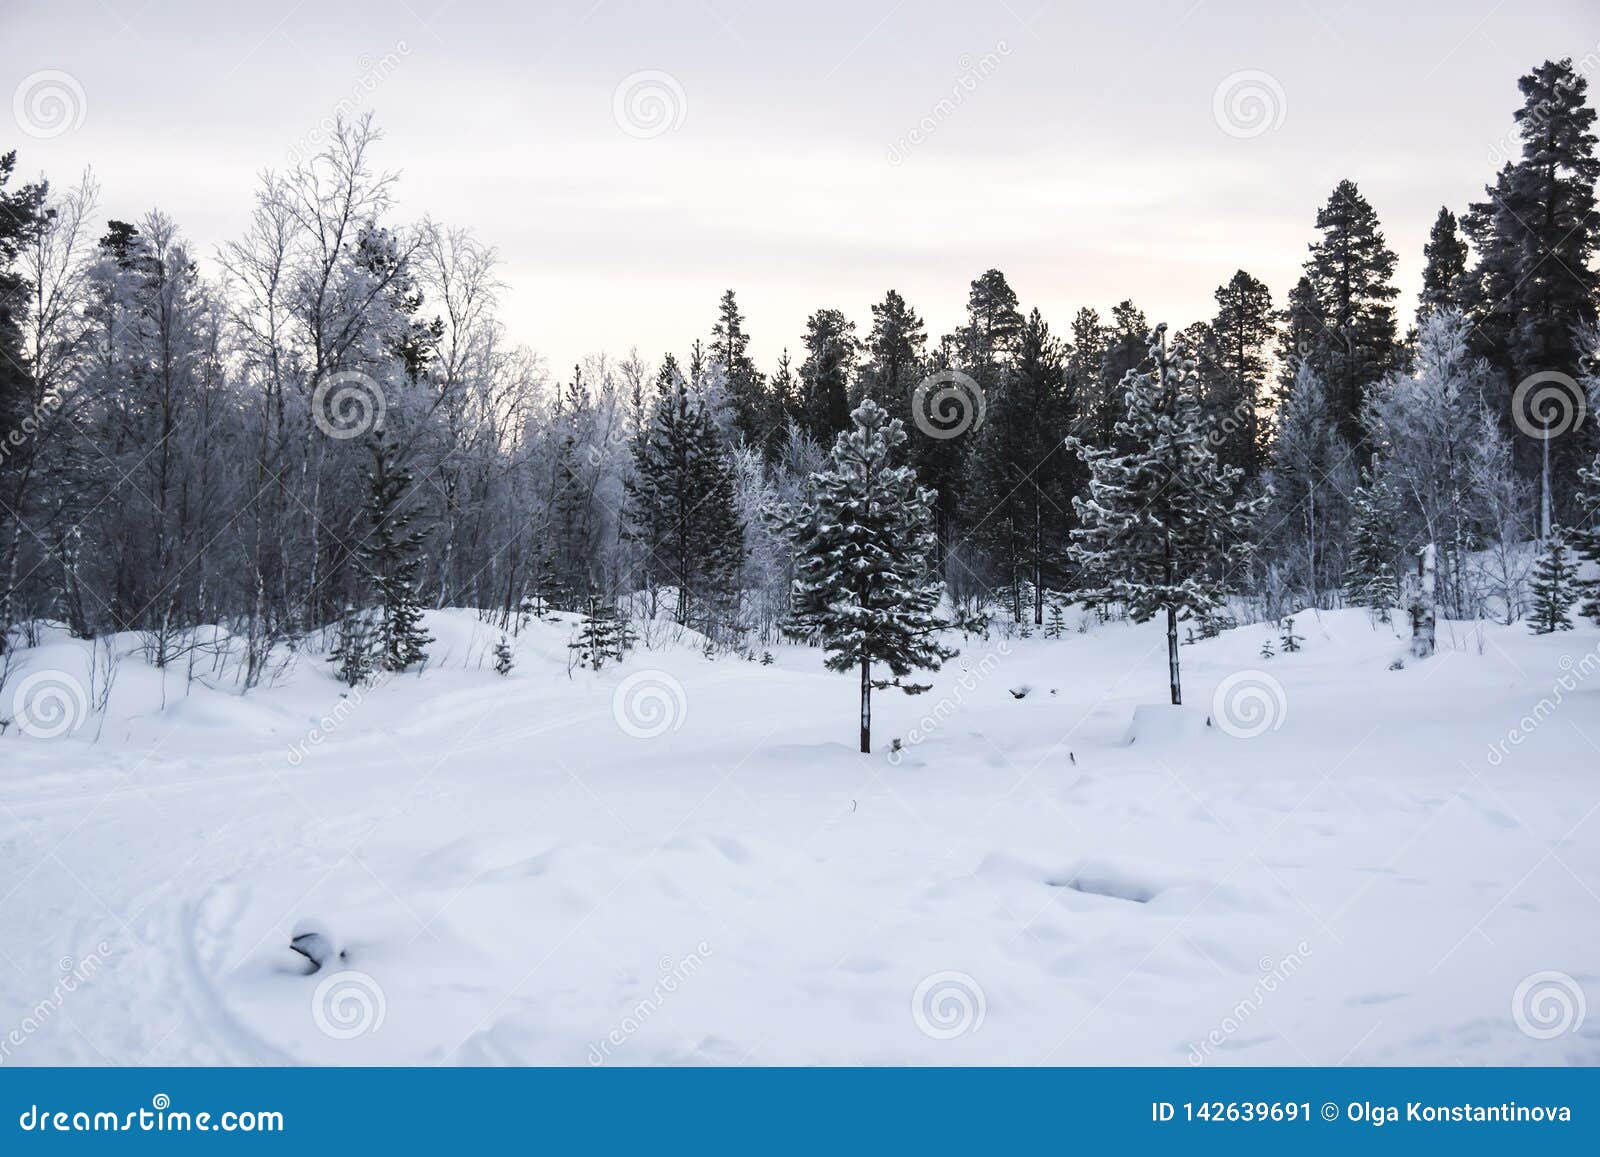 Dawn In A Snowy Forest Tundra Trees In The Snow Frost Nobody Landscape